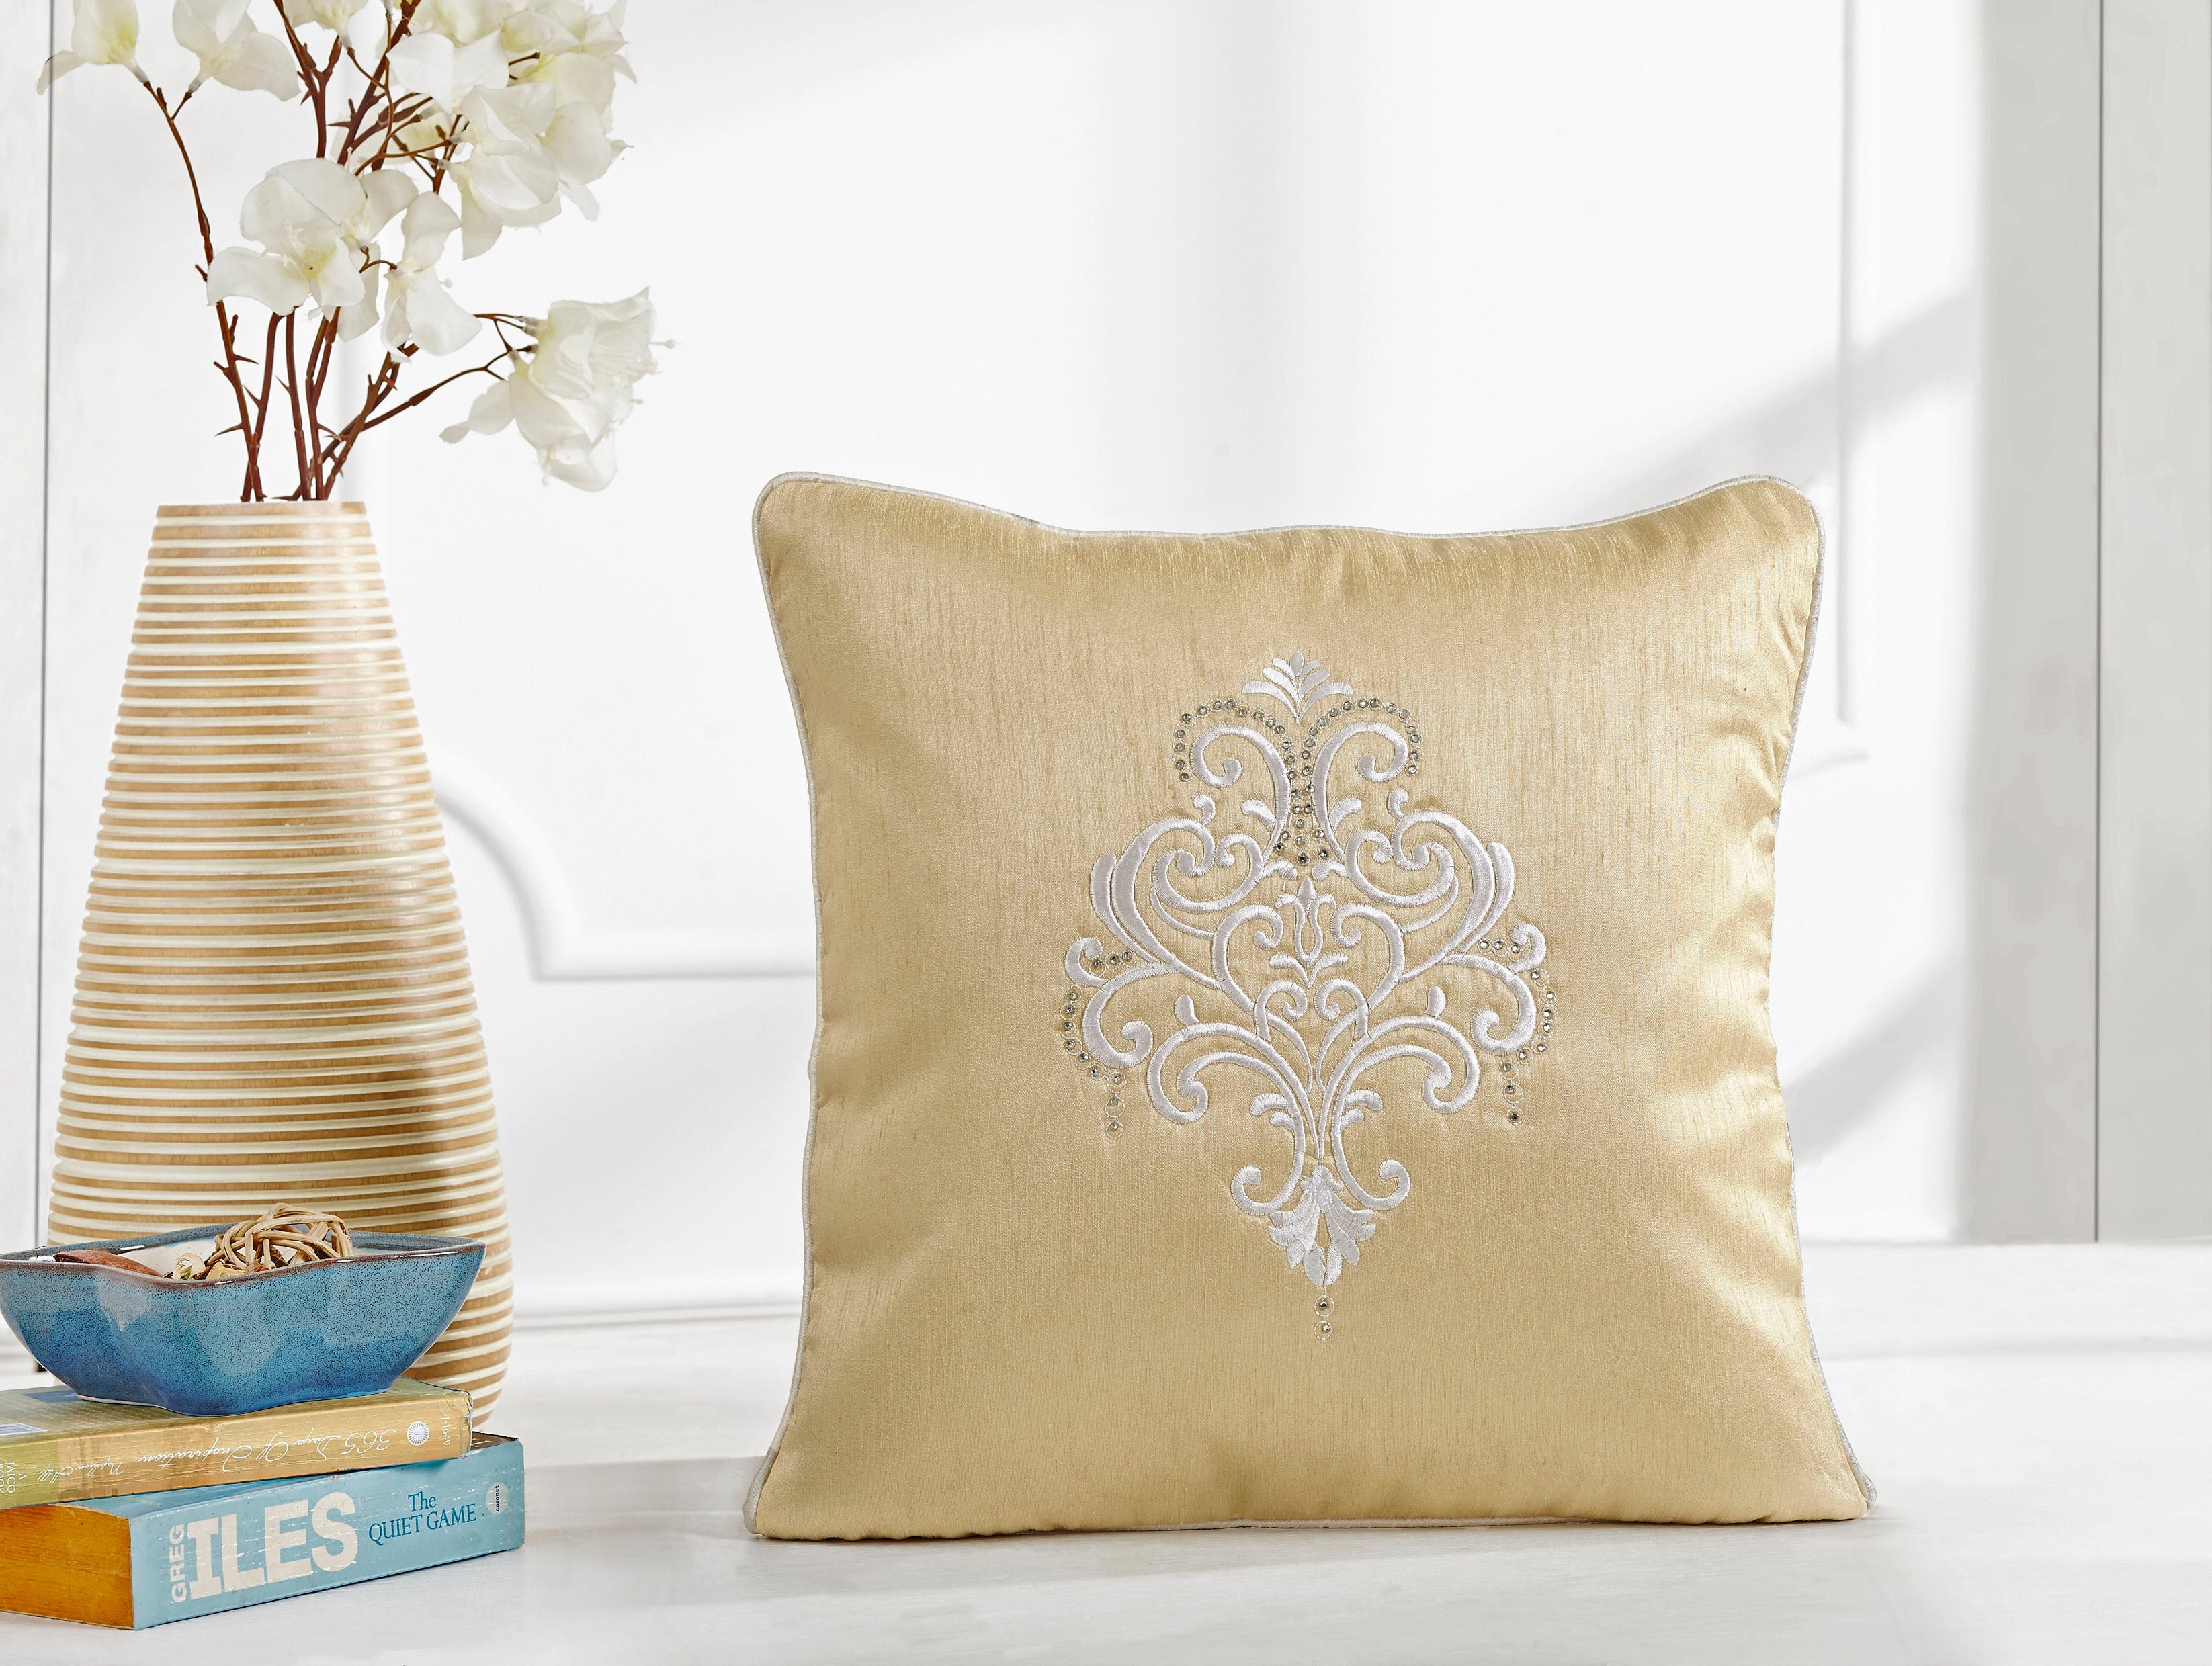 Inde Glow Cushion Cover